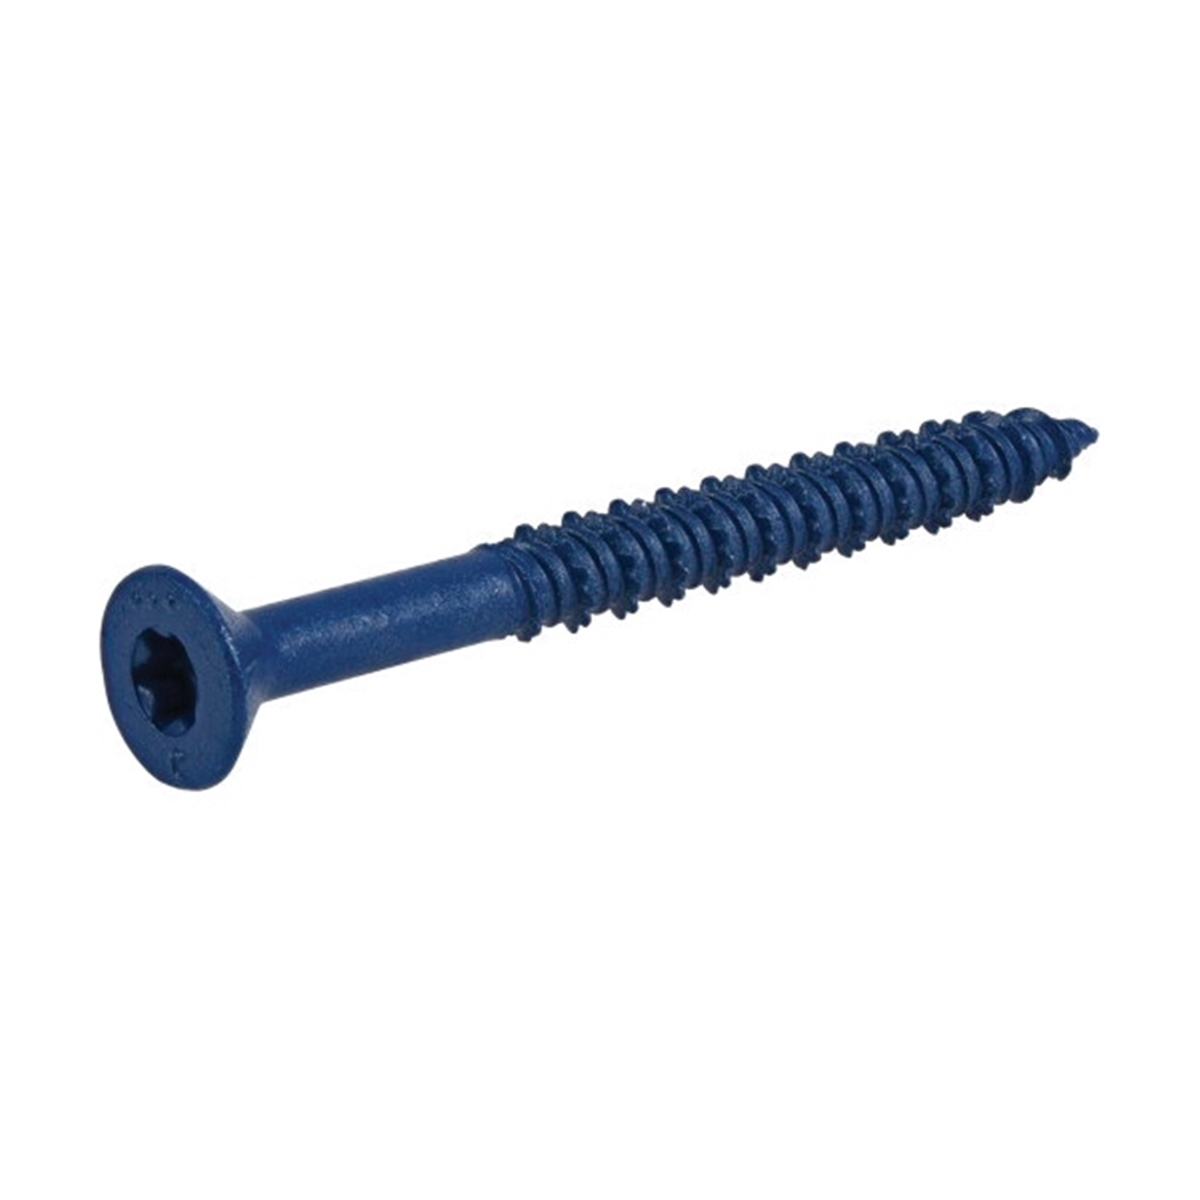 376533 Concrete Screw Anchor, 1/4 in Dia, 2-3/4 in L, Carbon Steel, Epoxy-Coated, 100/PK